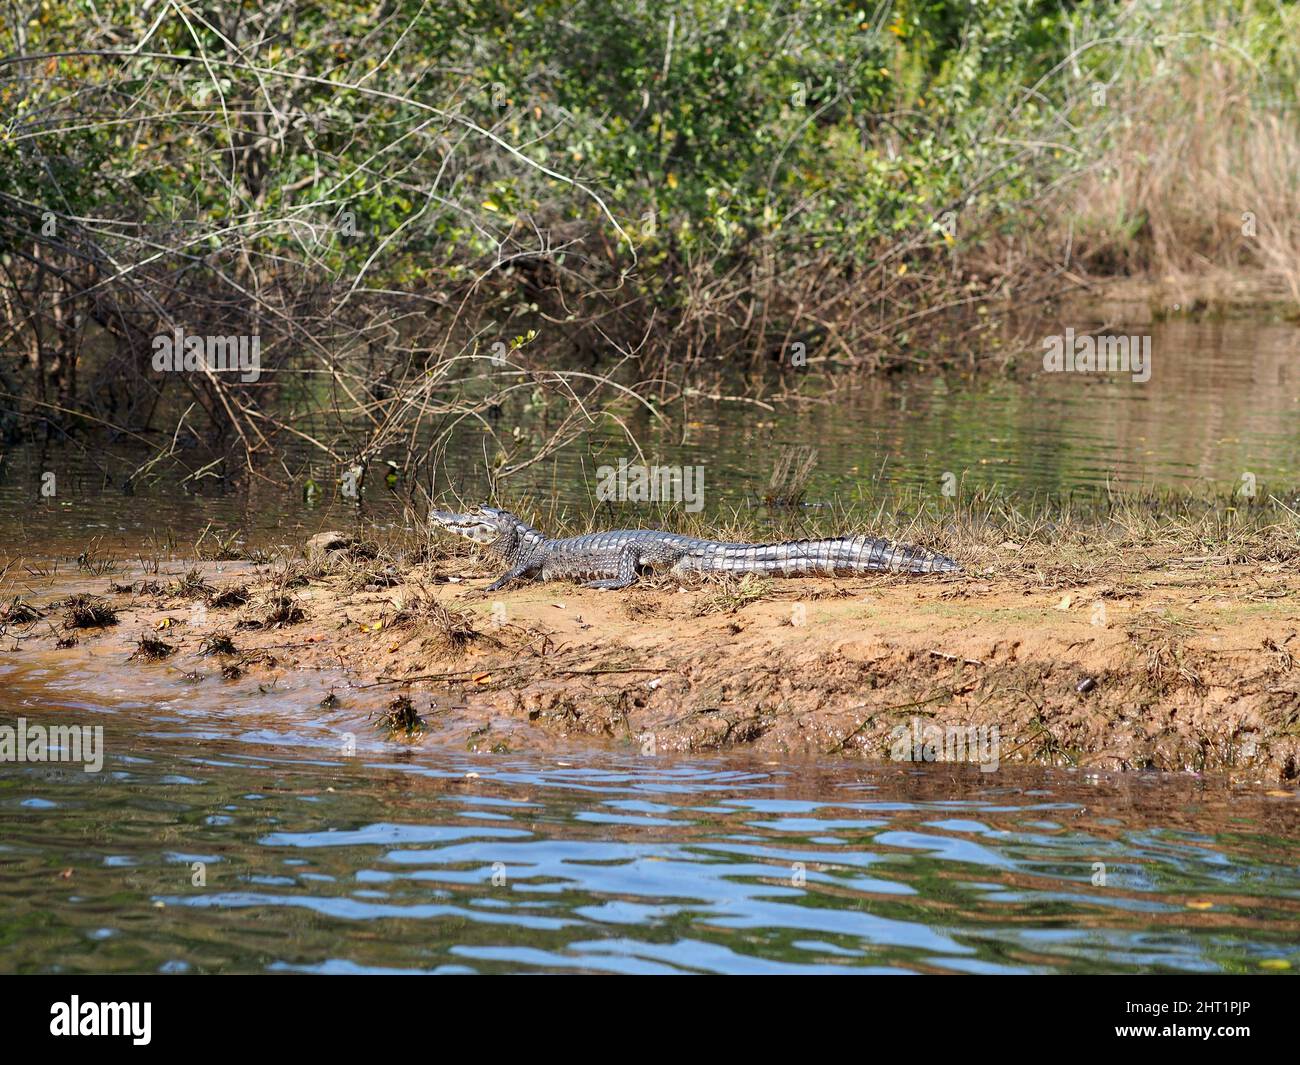 Closeup shot of the caiman sitting on a river bank. Stock Photo